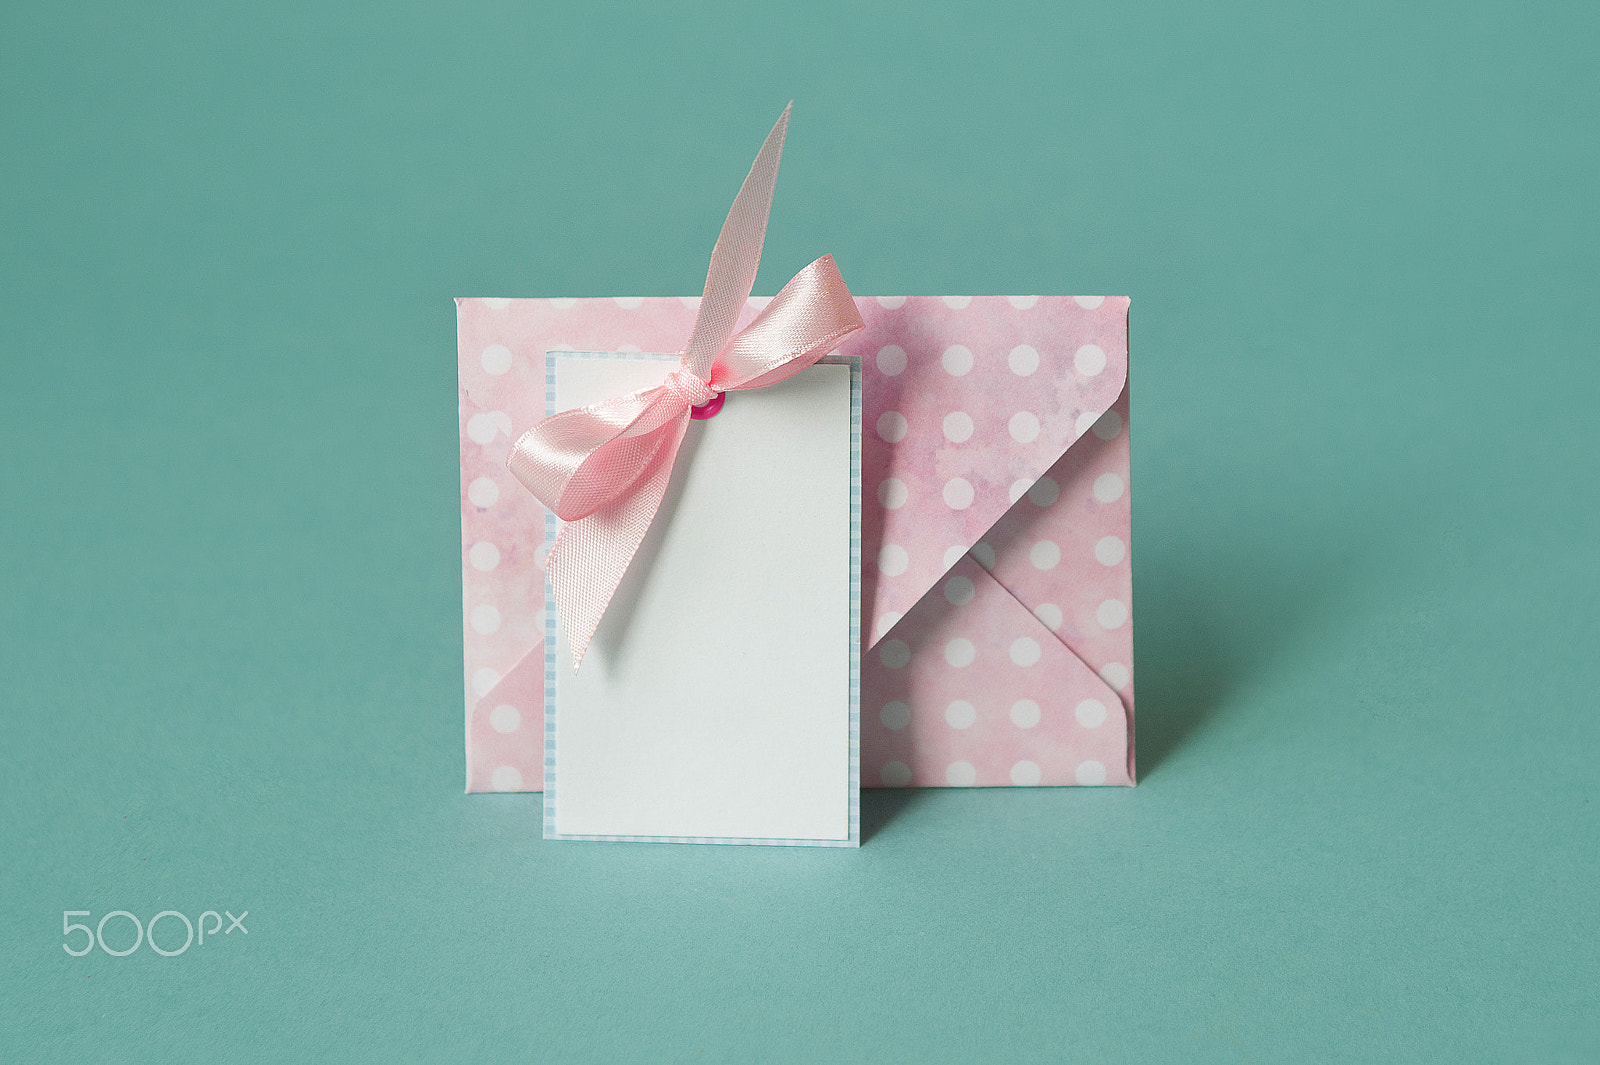 Nikon D700 sample photo. Blank white paper card with with a pink bow under envelop on a turquoise background photography